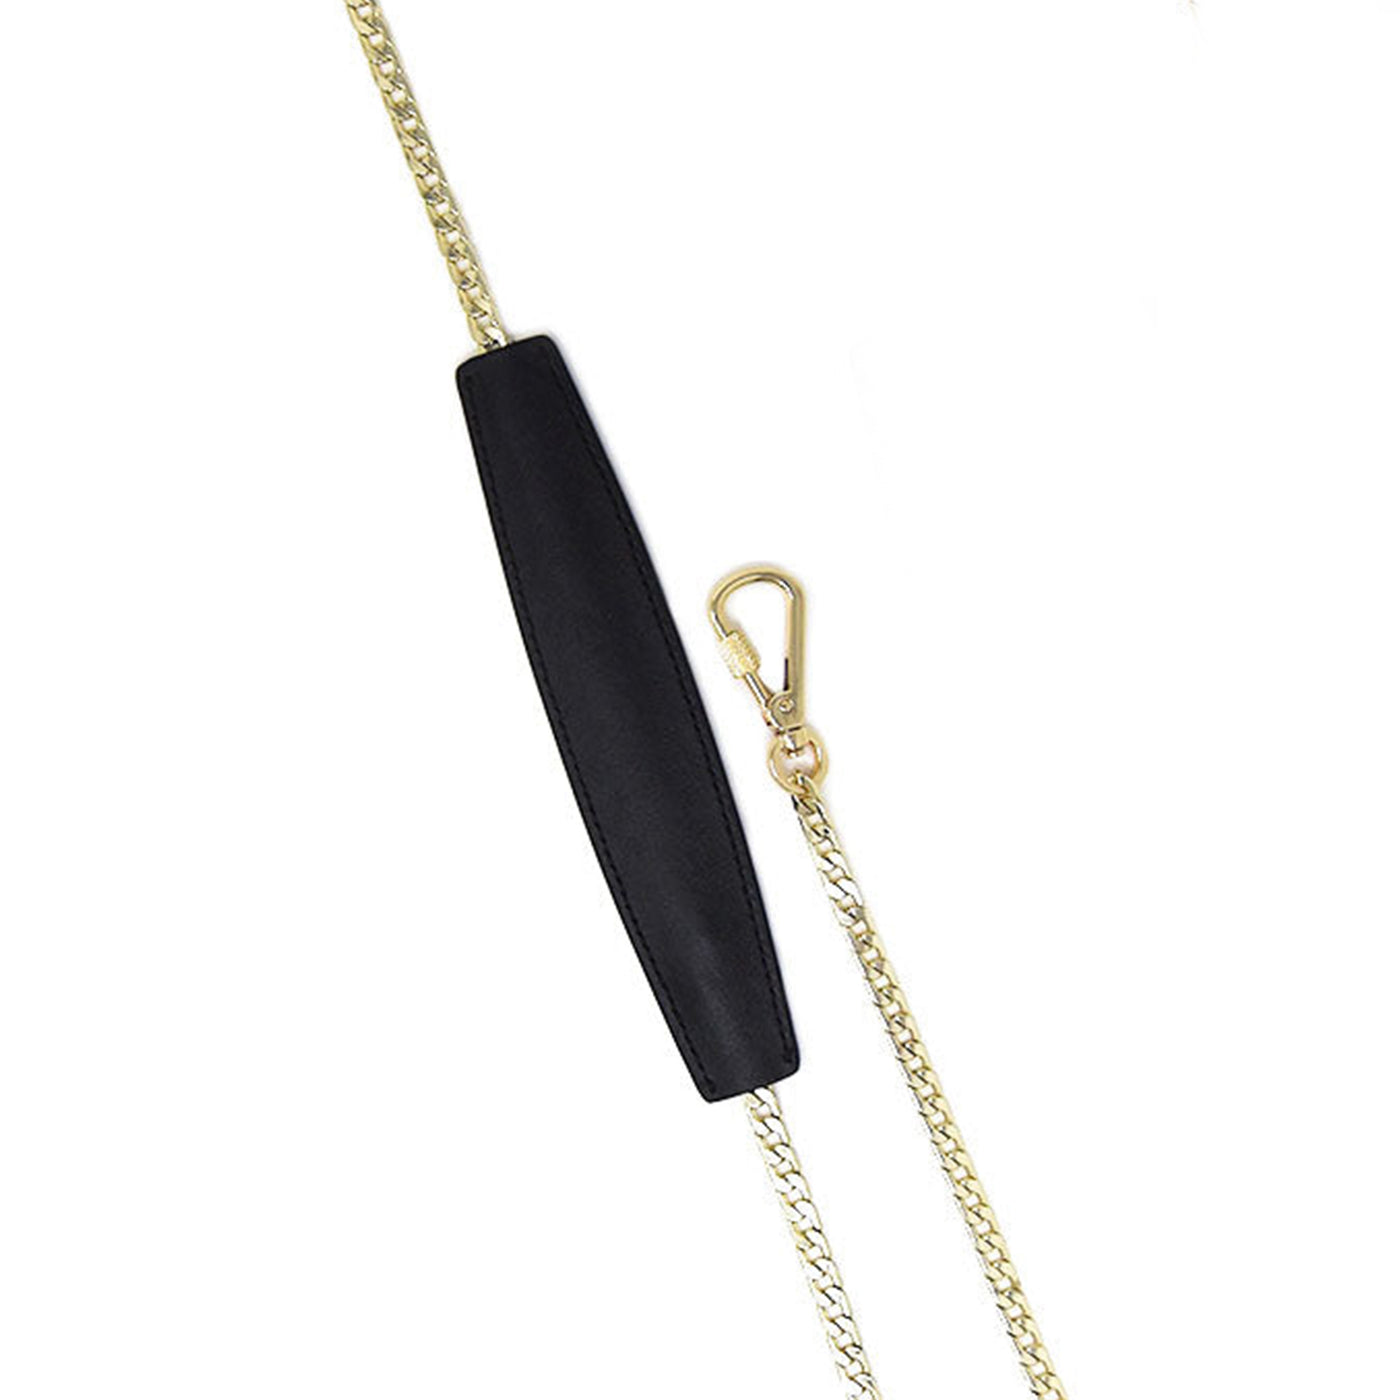 Locking Chain Strap with Shoulder Pad in Black Gold